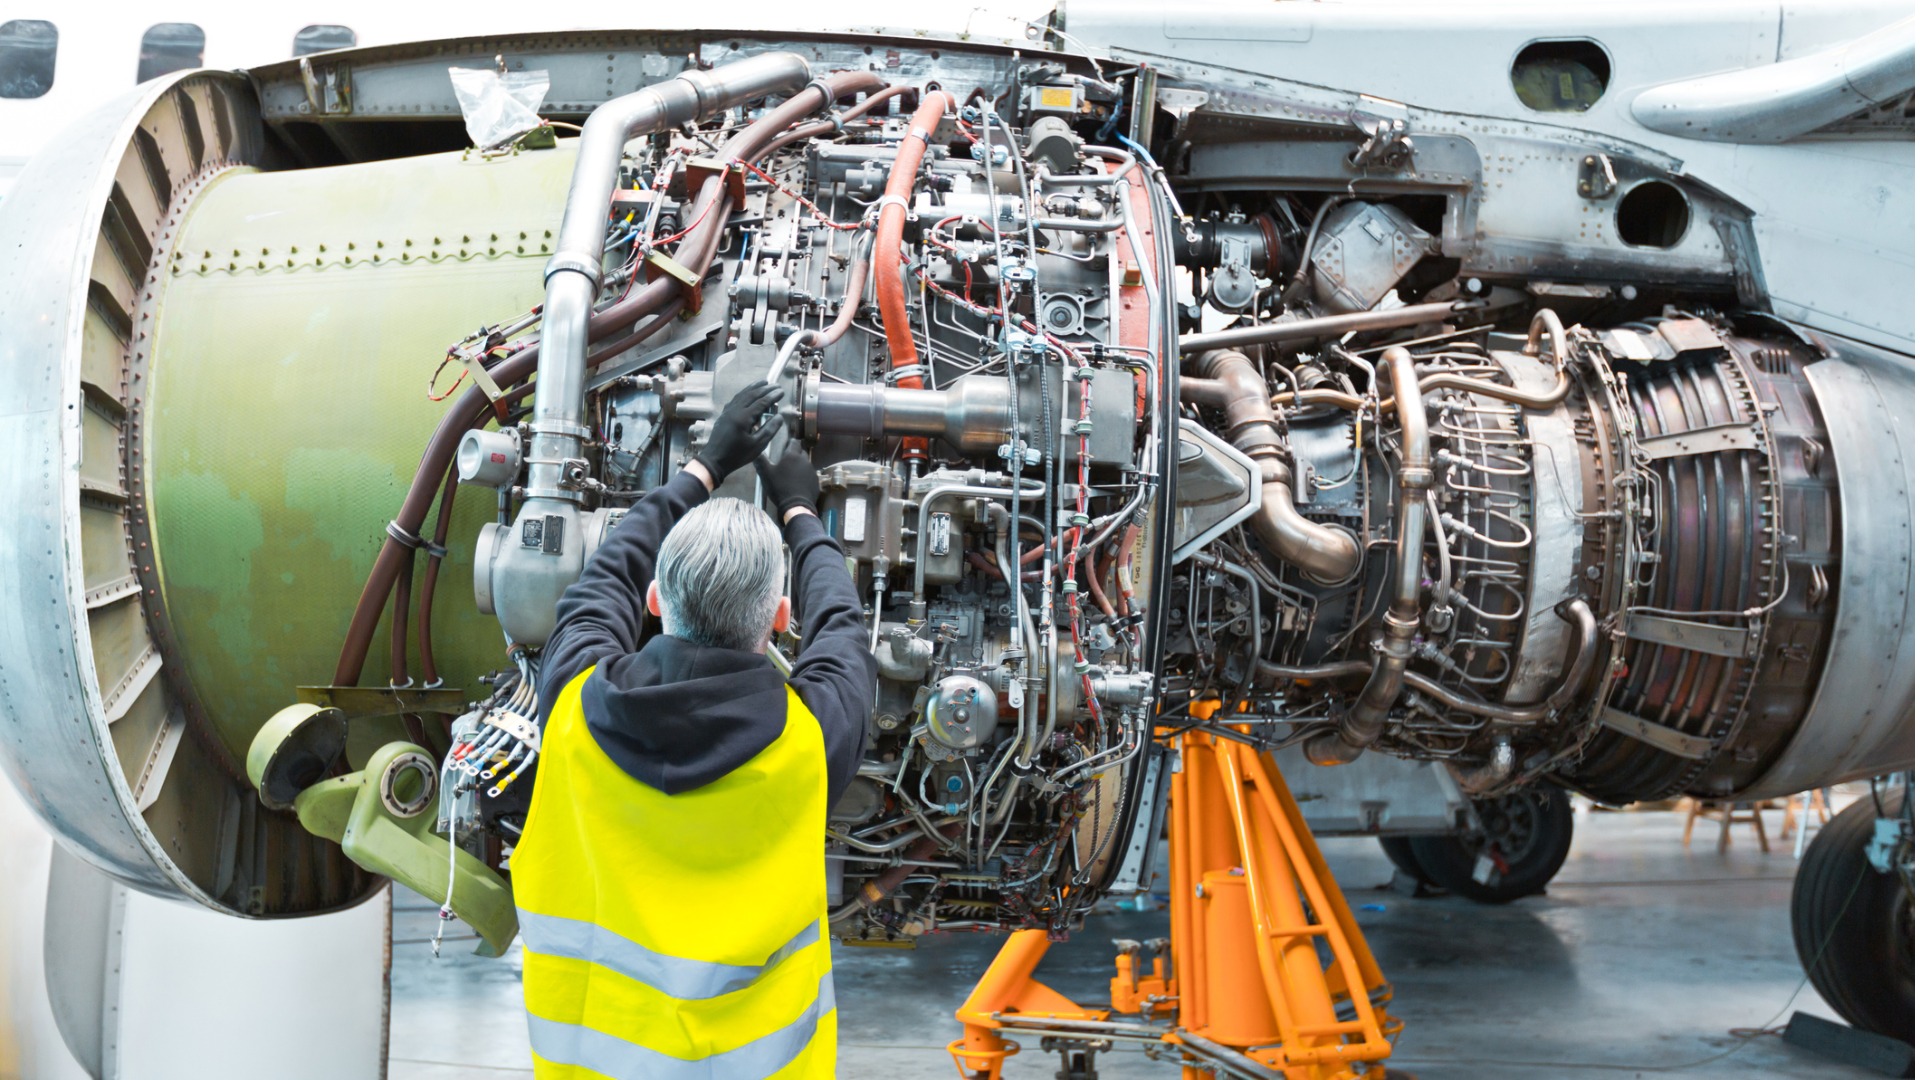 How COVID19 accelerated the aircraft mechanic shortage